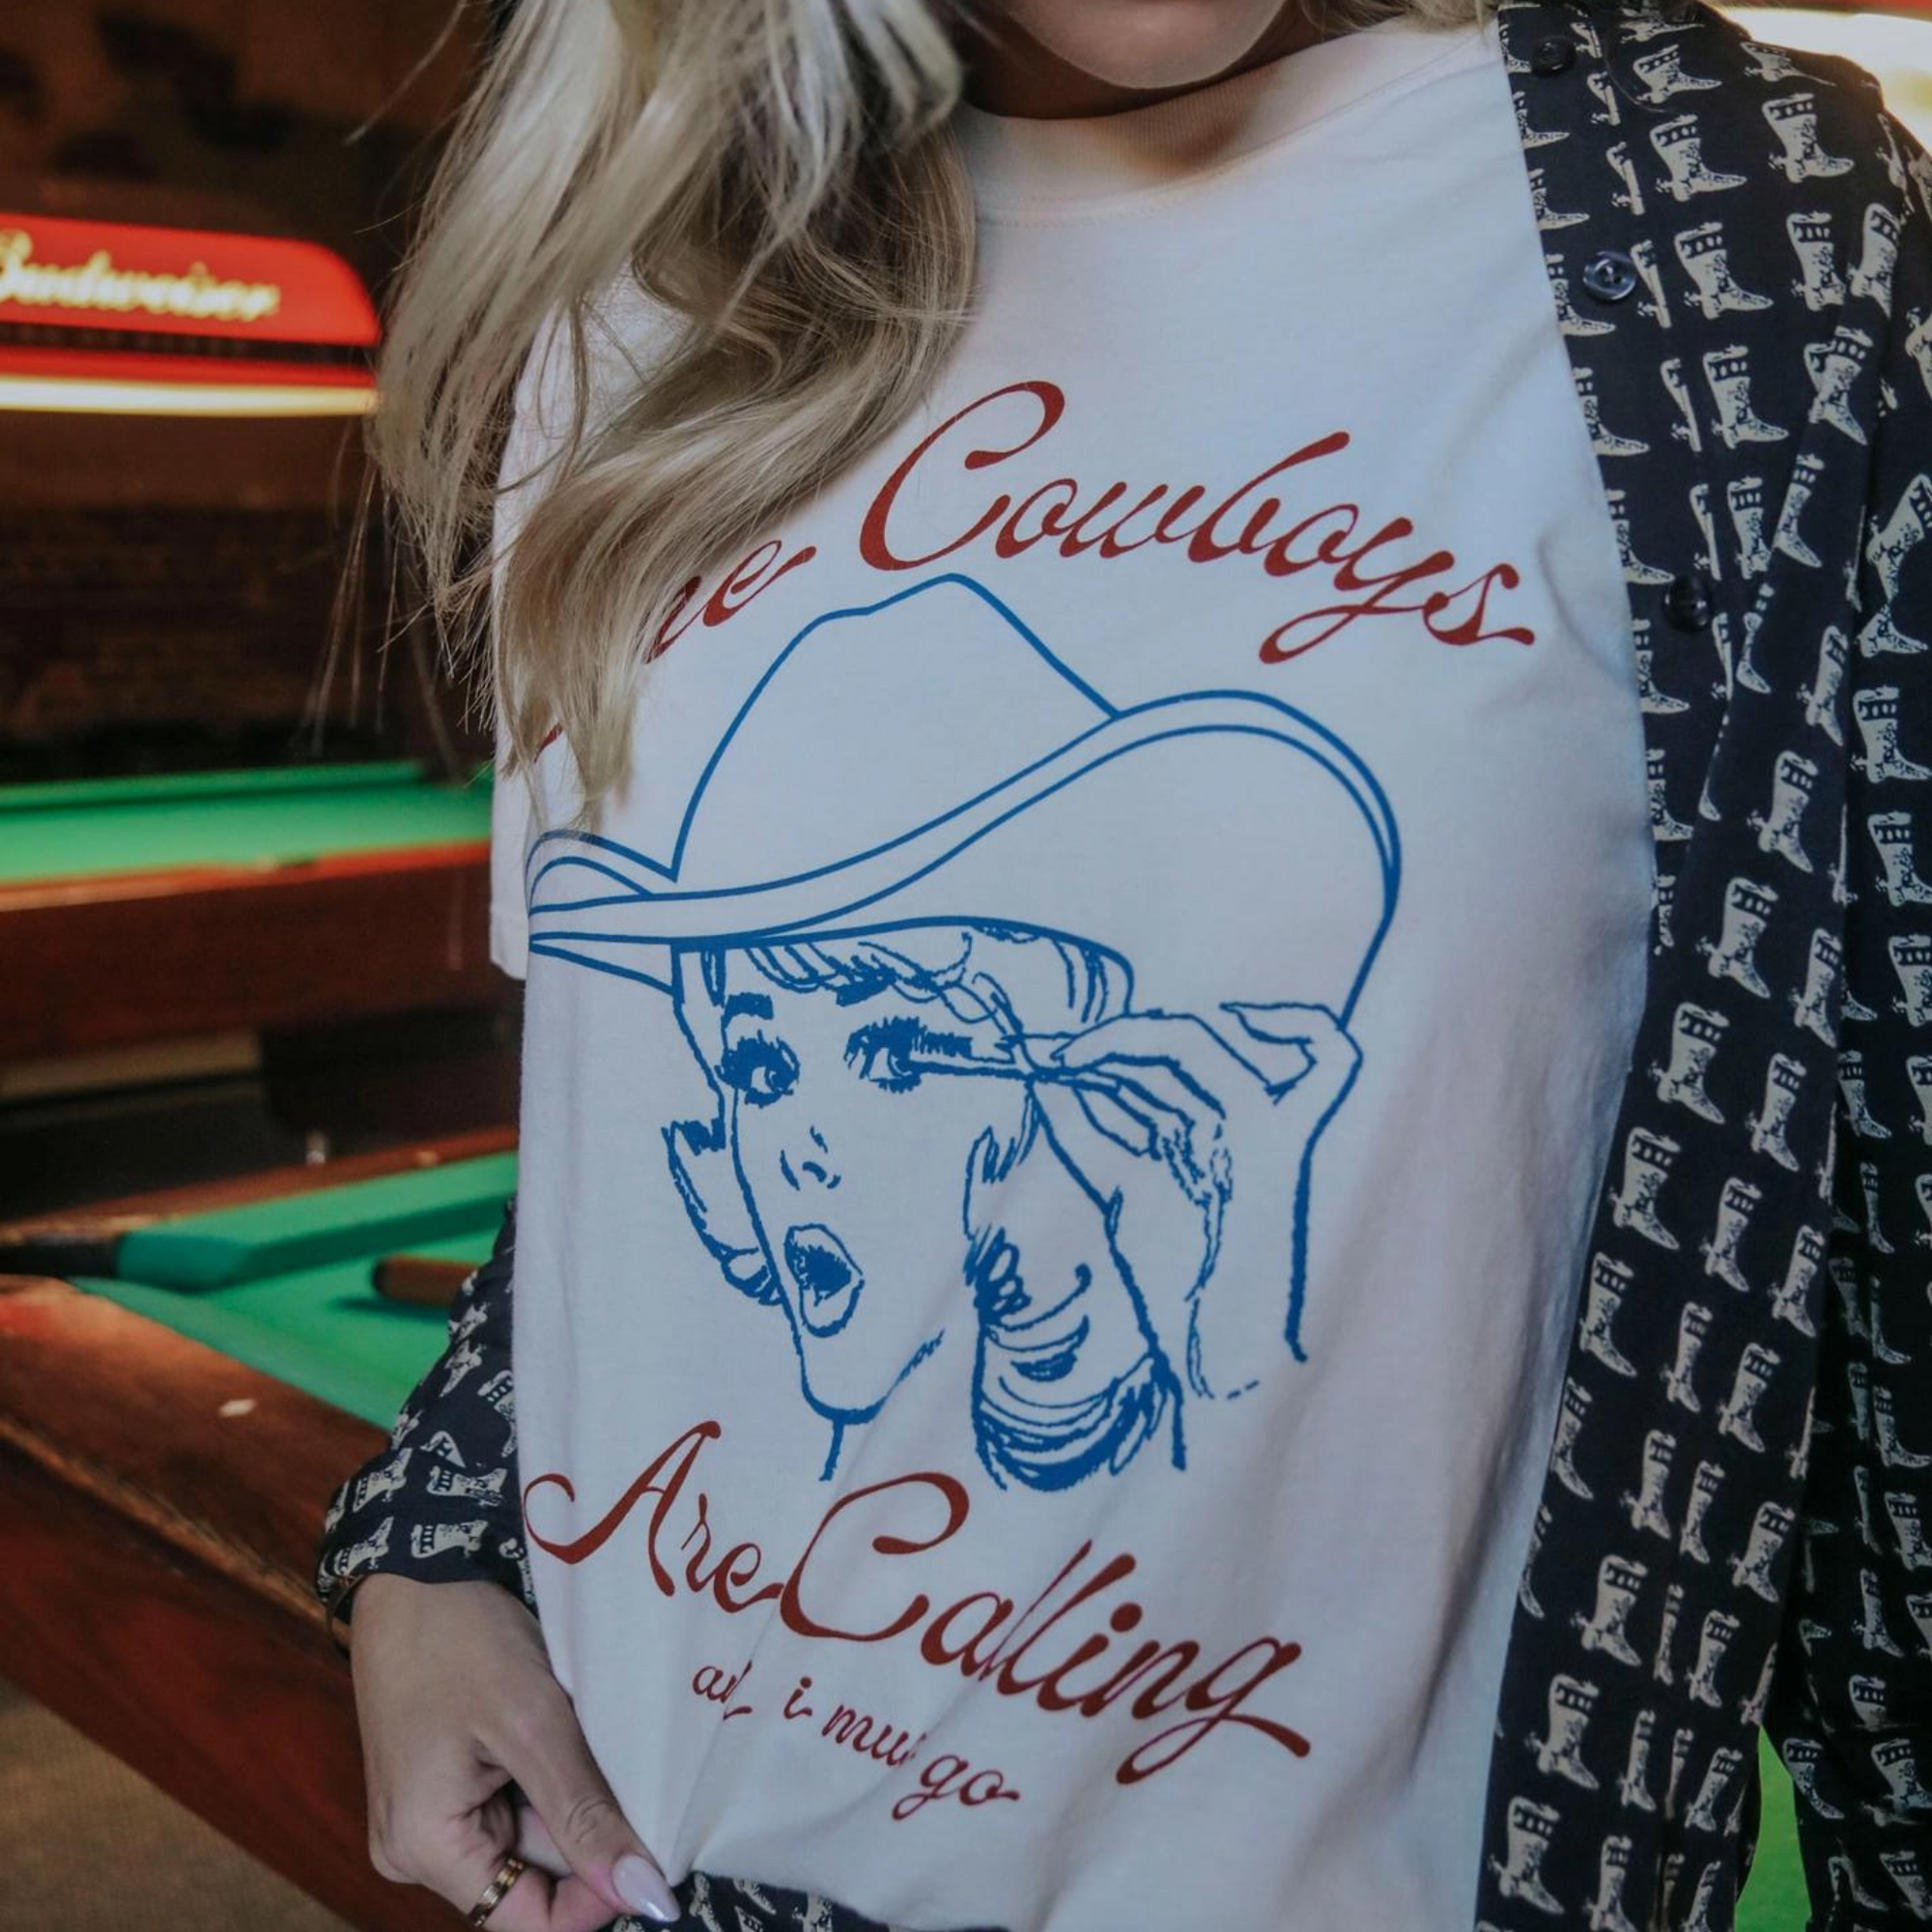 The Cowboys Are Calling T-Shirt